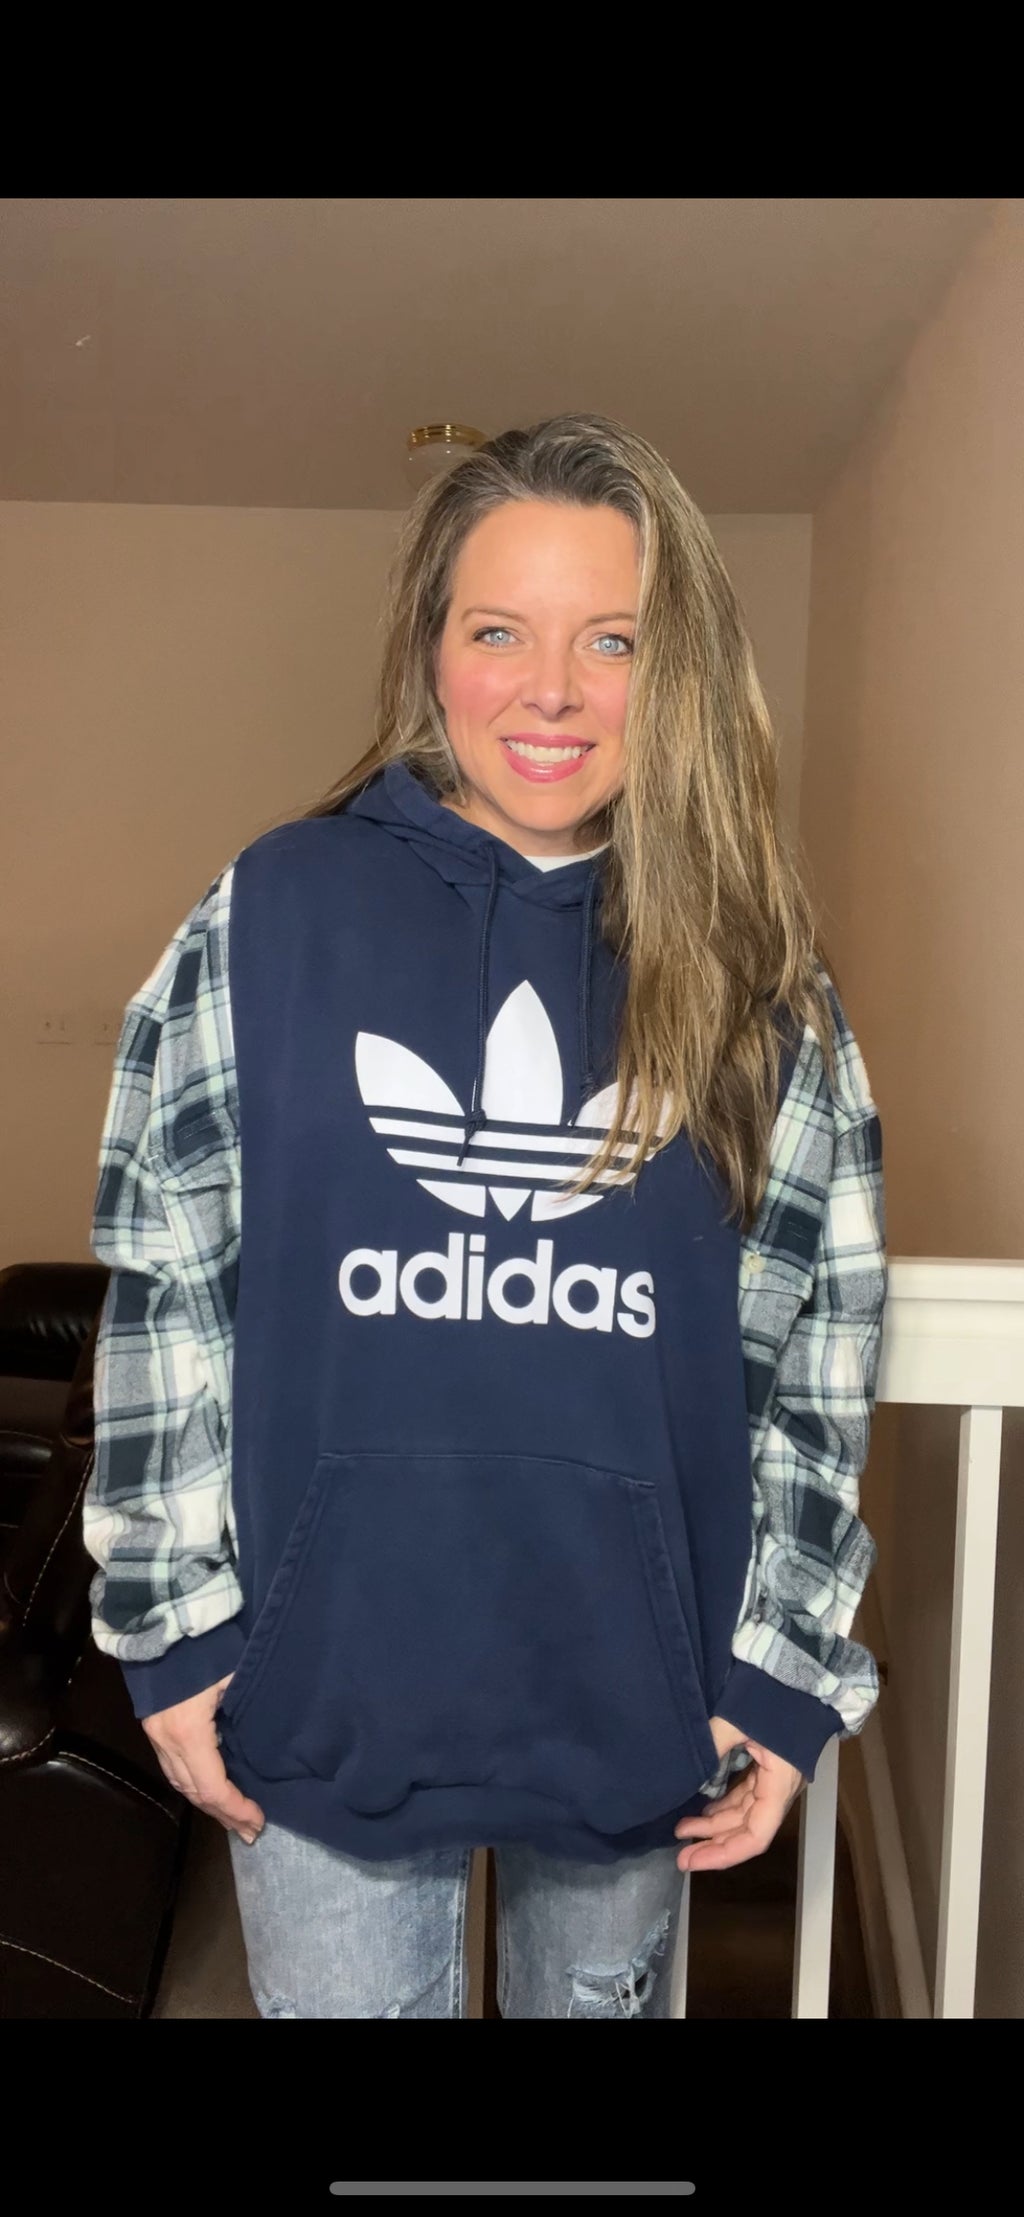 Adidas - woman’s 1X/2X - thick sweatshirt with flannel sleeves